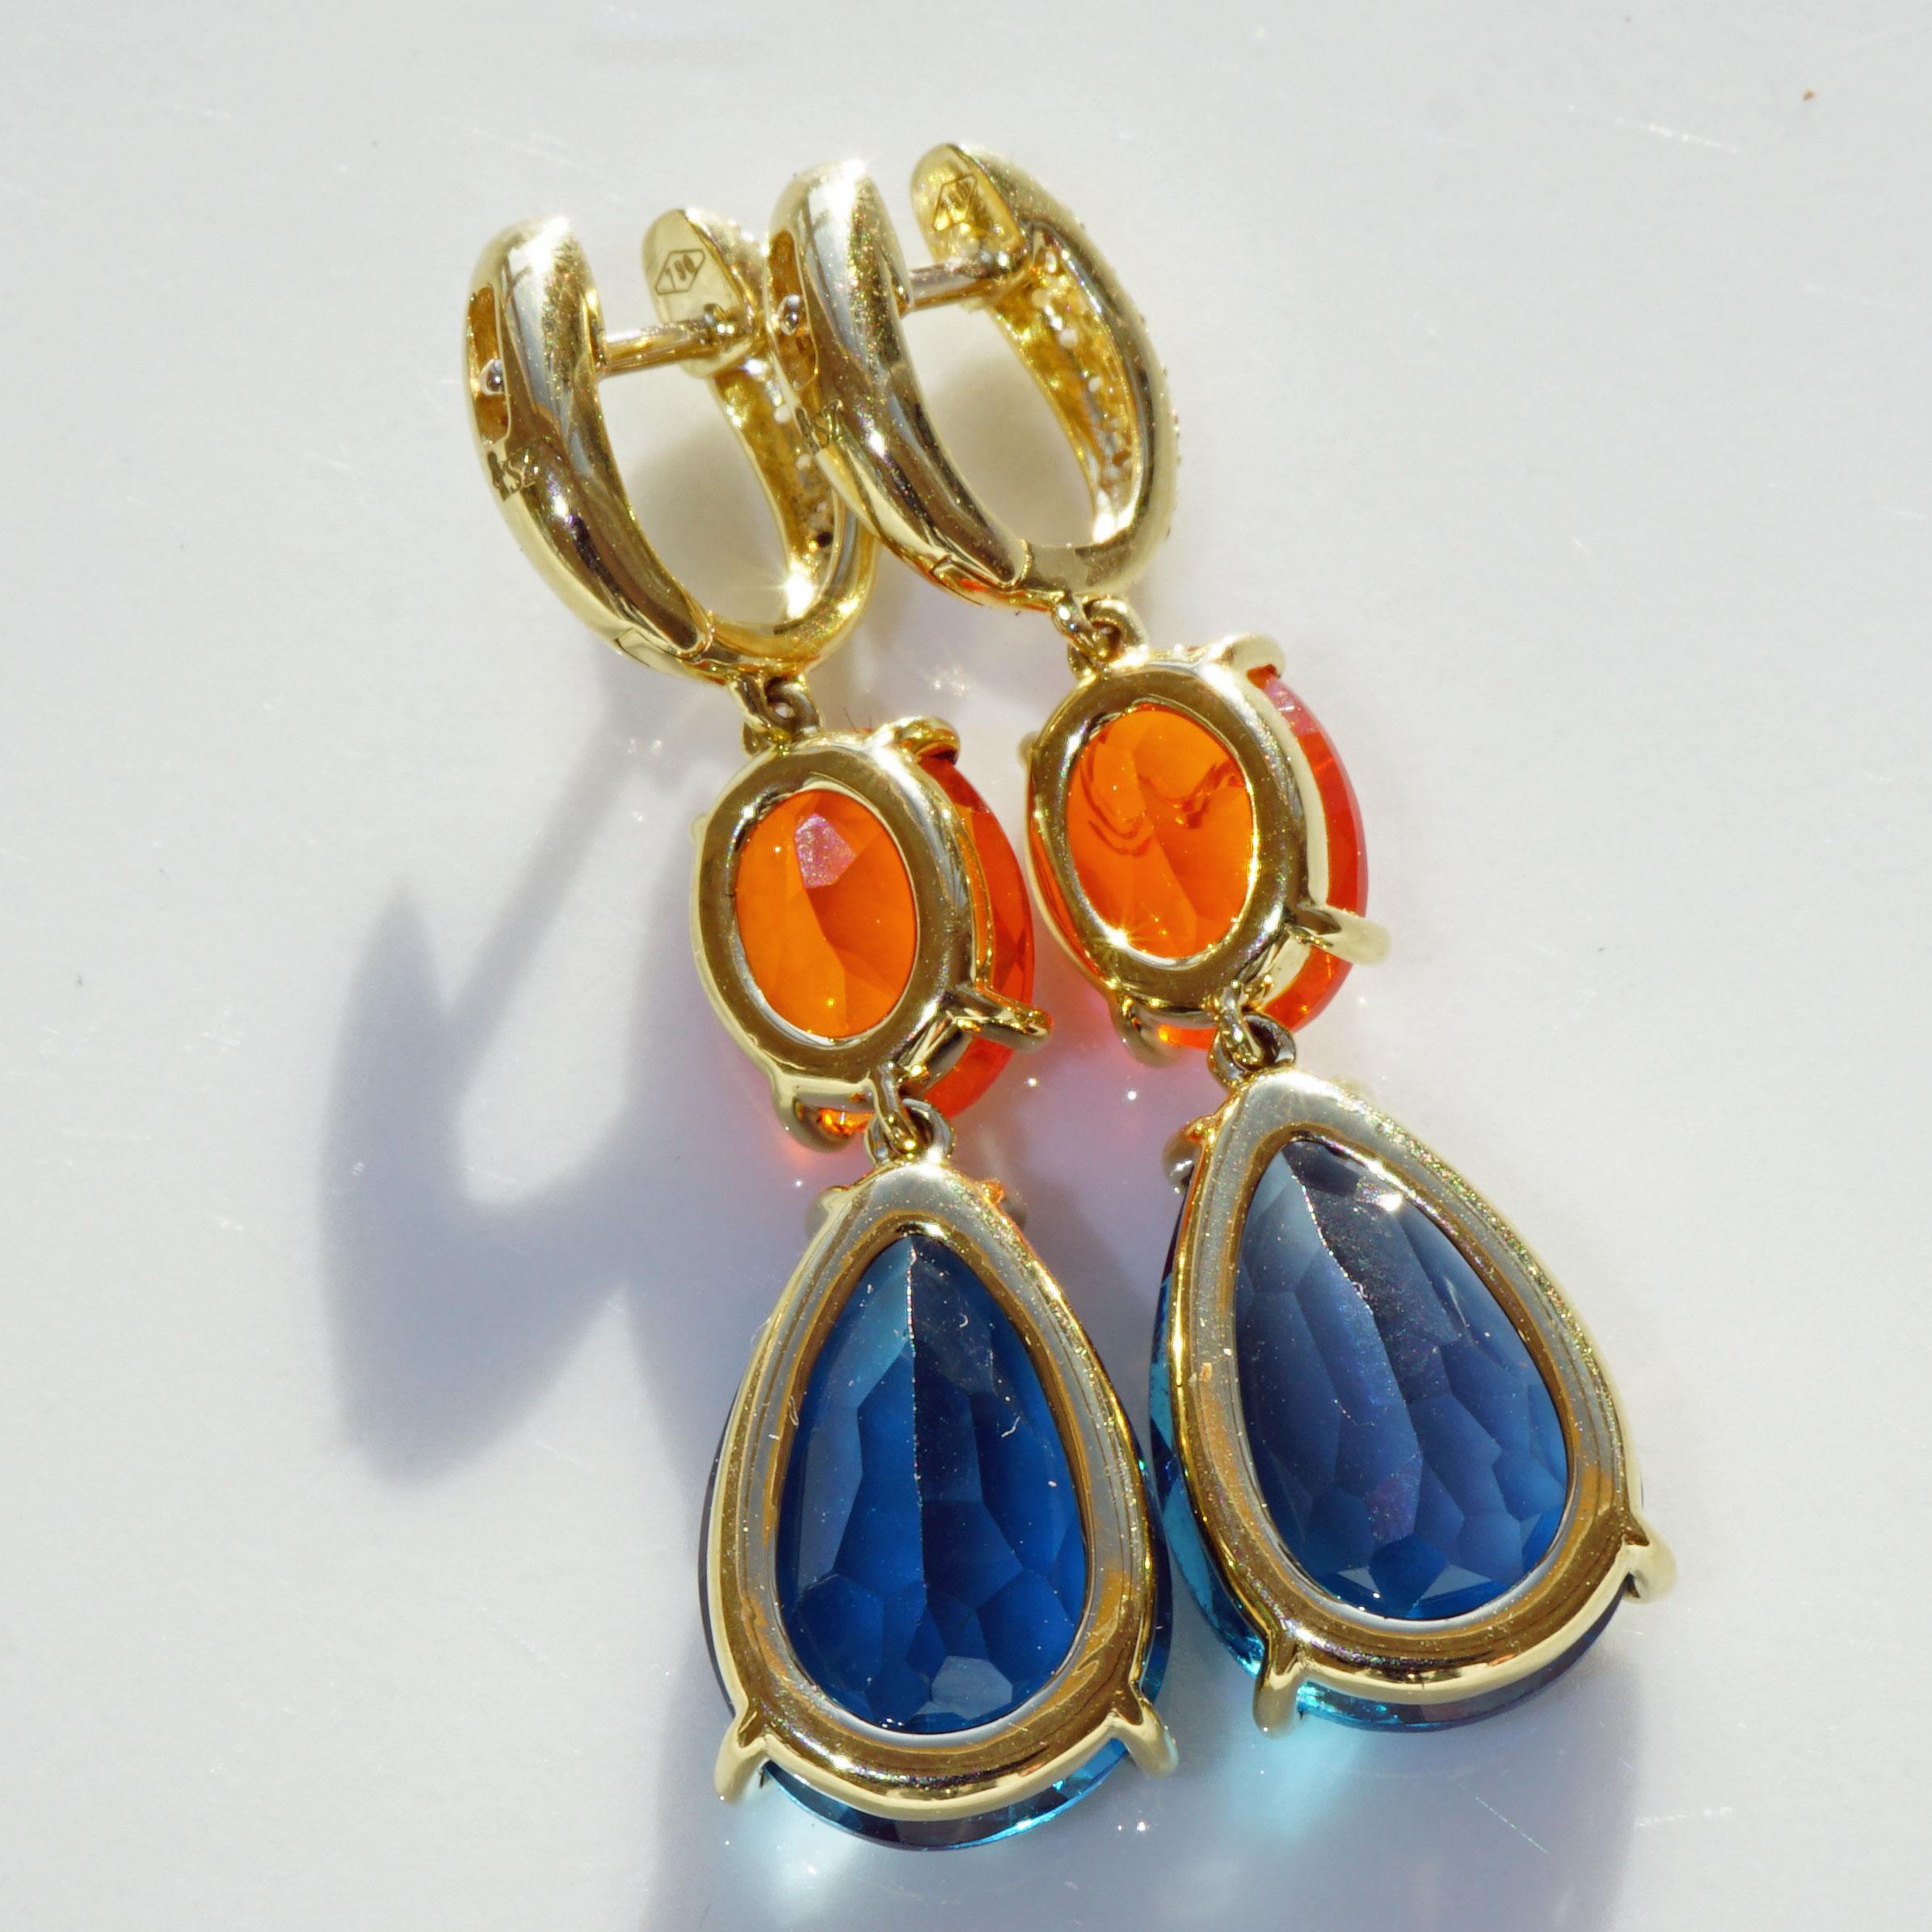 Topaz Fireopal Brilliant Earrings Quality Ear Jewellery Wow Colors 18 kt Italy In New Condition For Sale In Viena, Viena